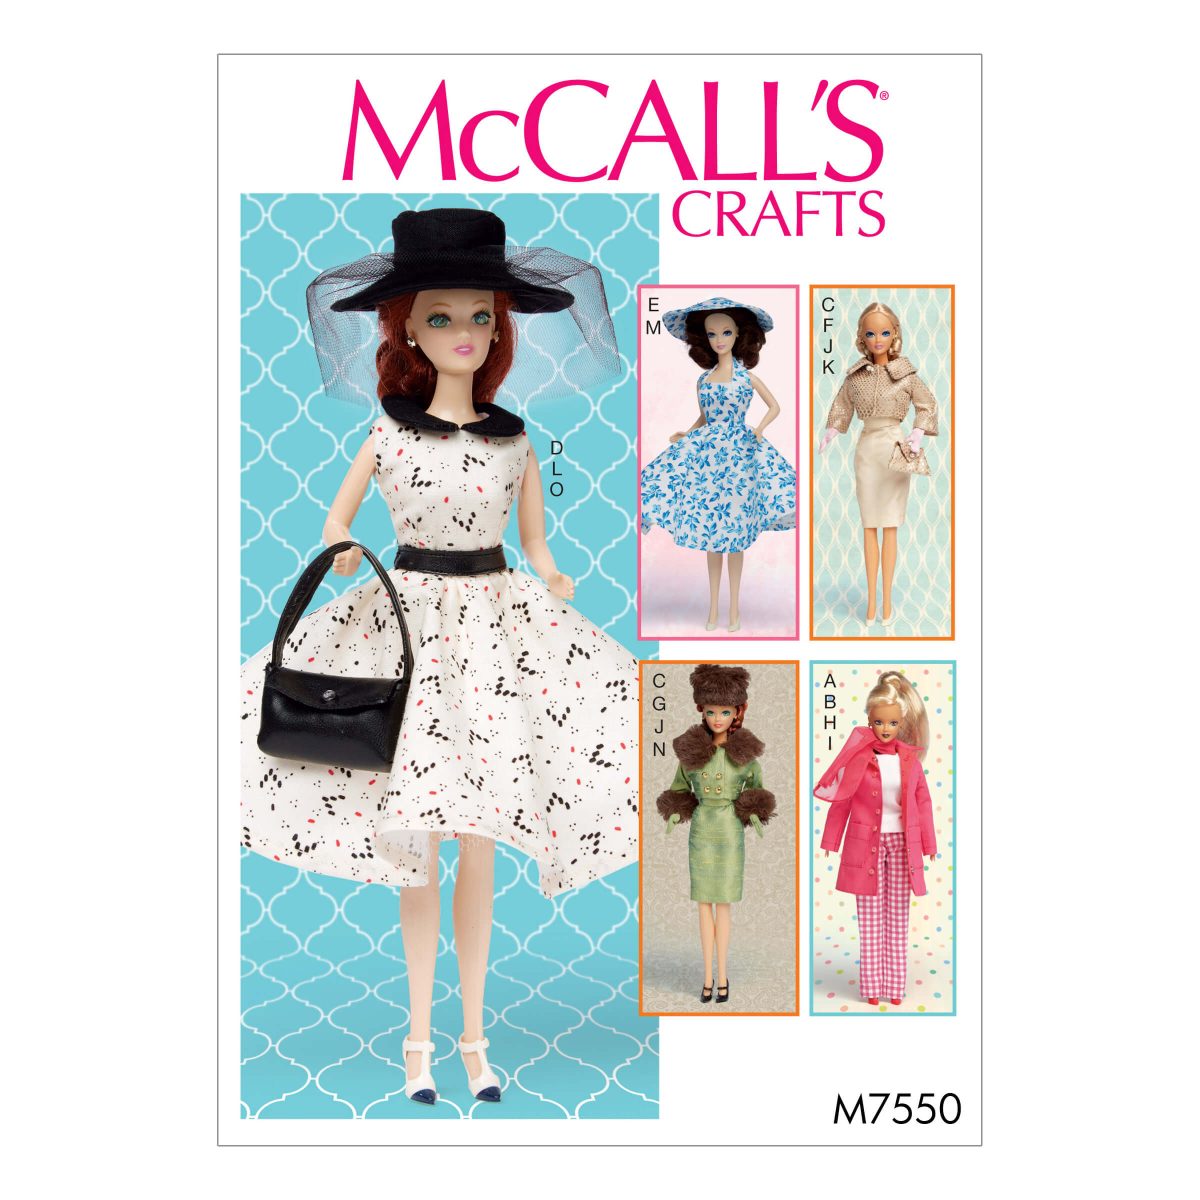 McCall's Sewing Pattern M7550 Retro-Style Clothes and Accessories for 11½" Doll